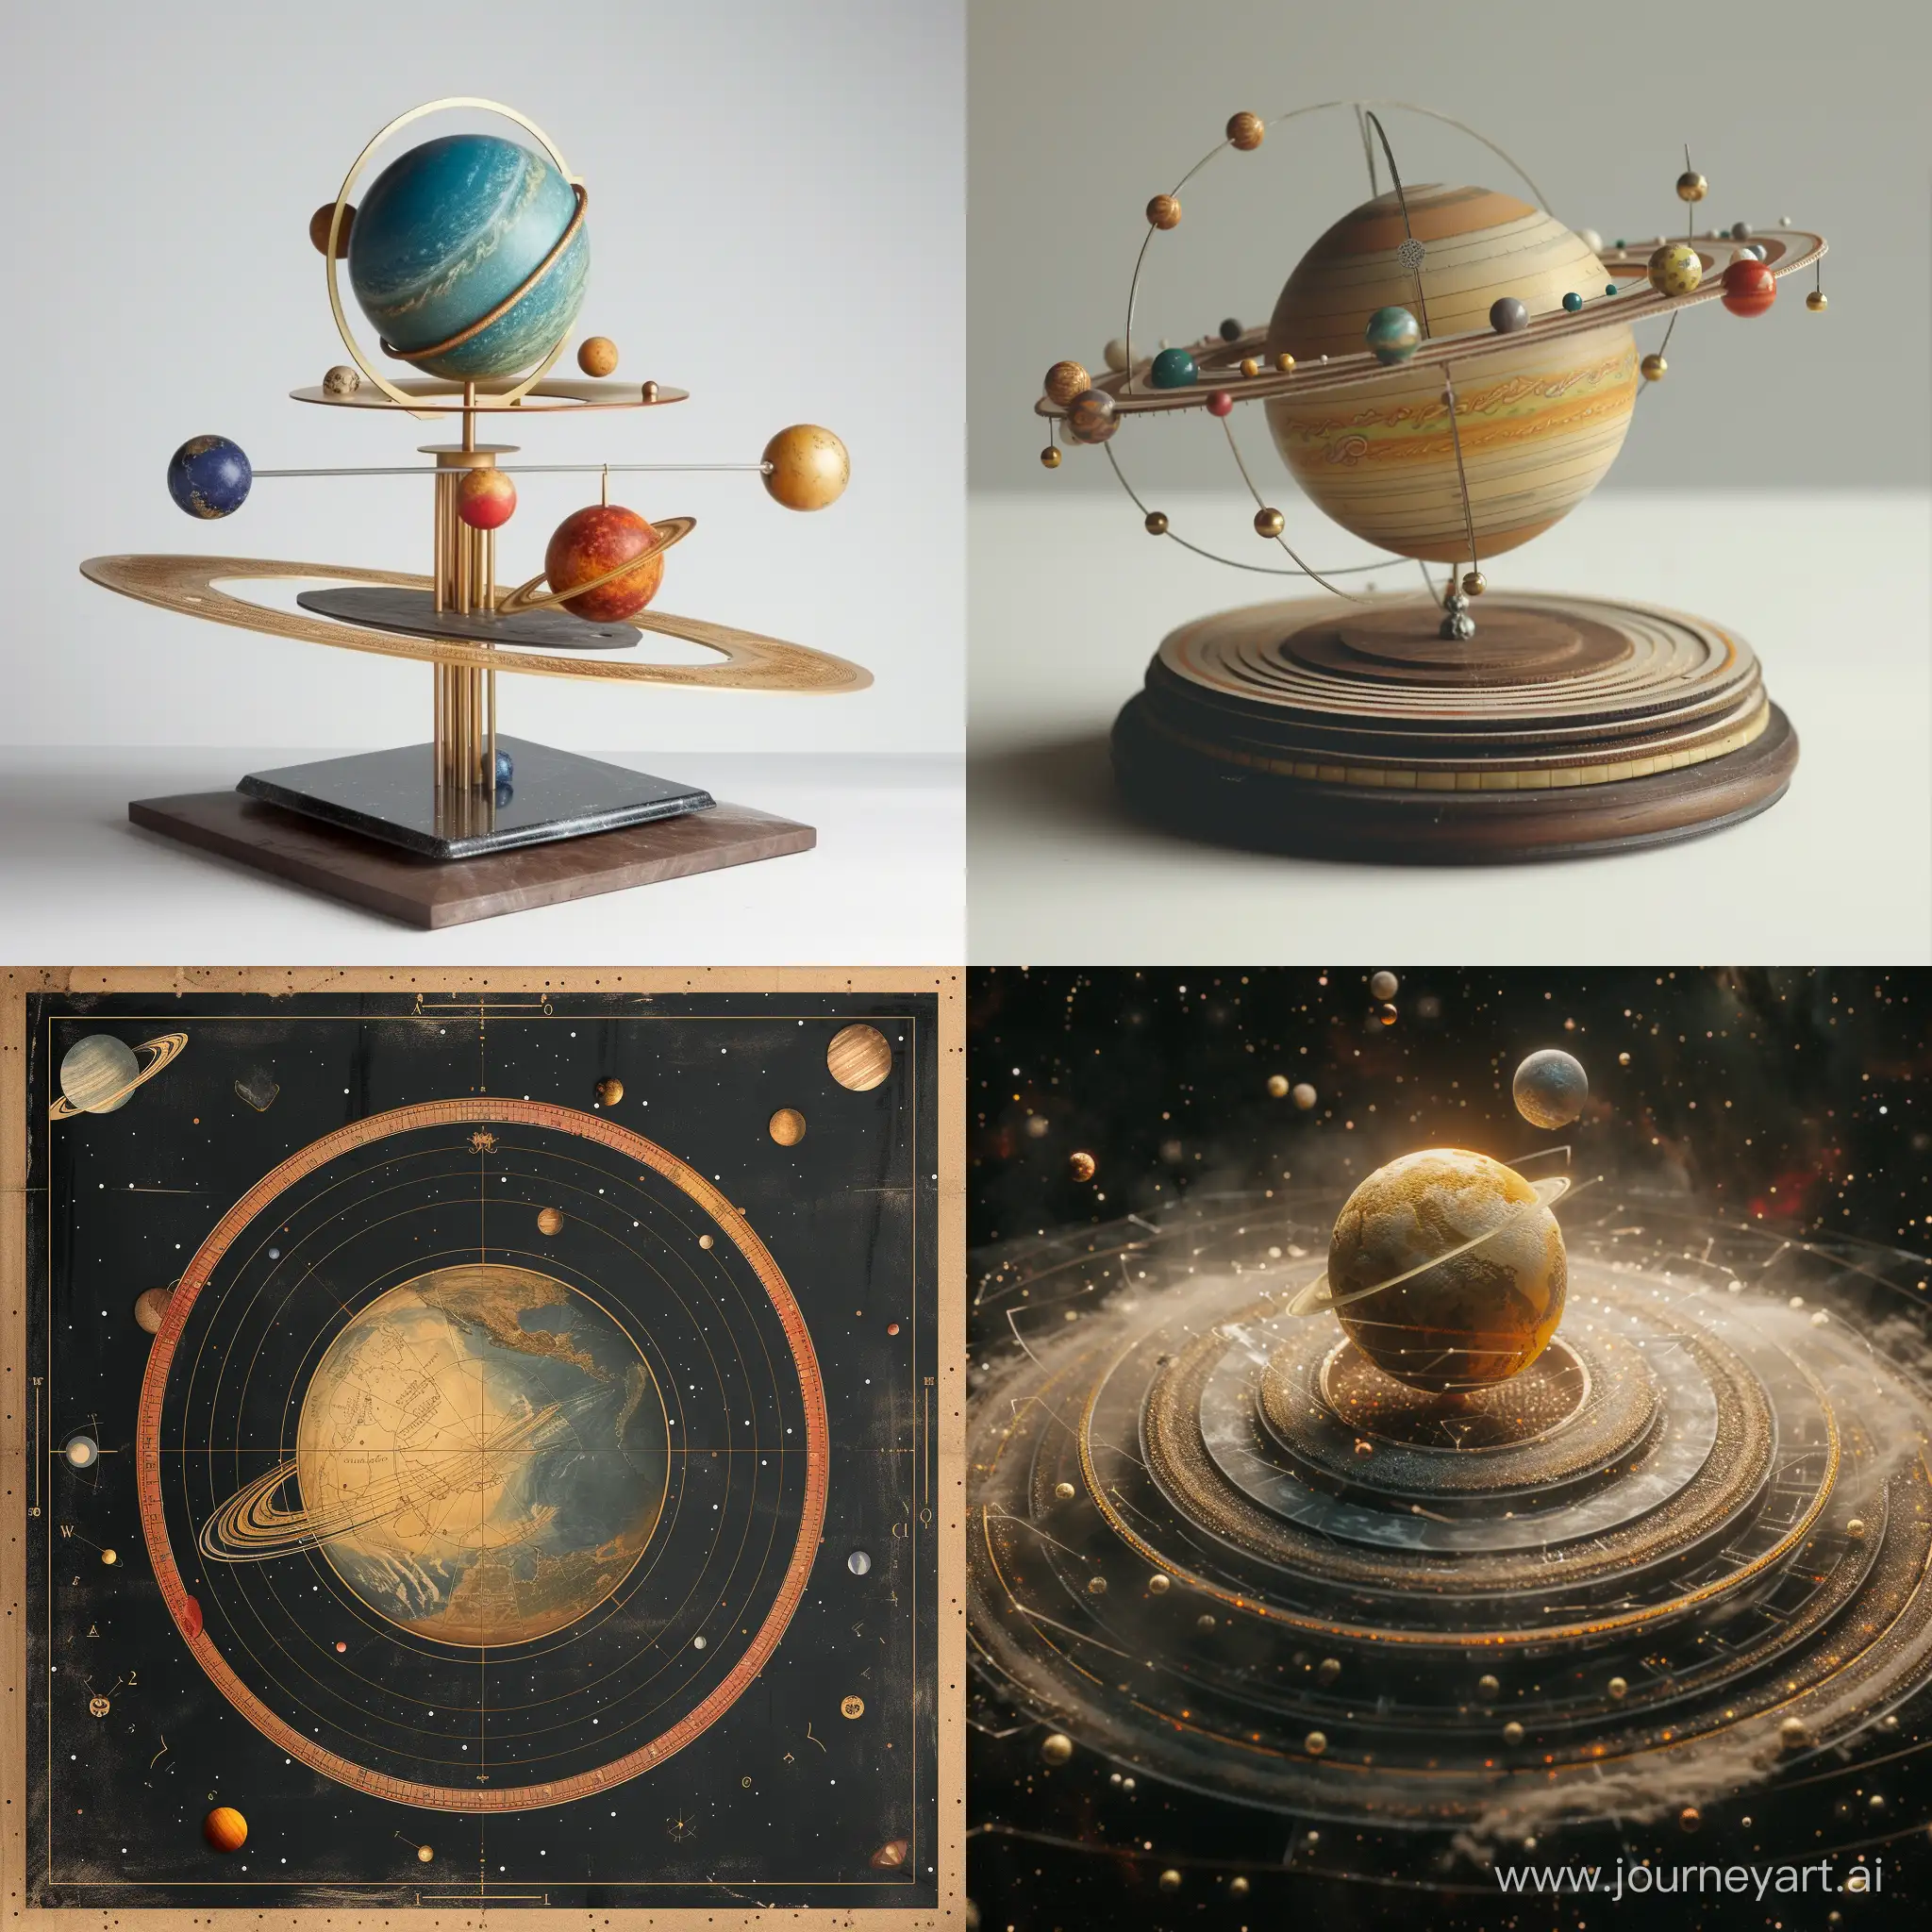 Olivier-Planetary-Scale-Art-Vibrant-Exploration-of-Cosmic-Dimensions